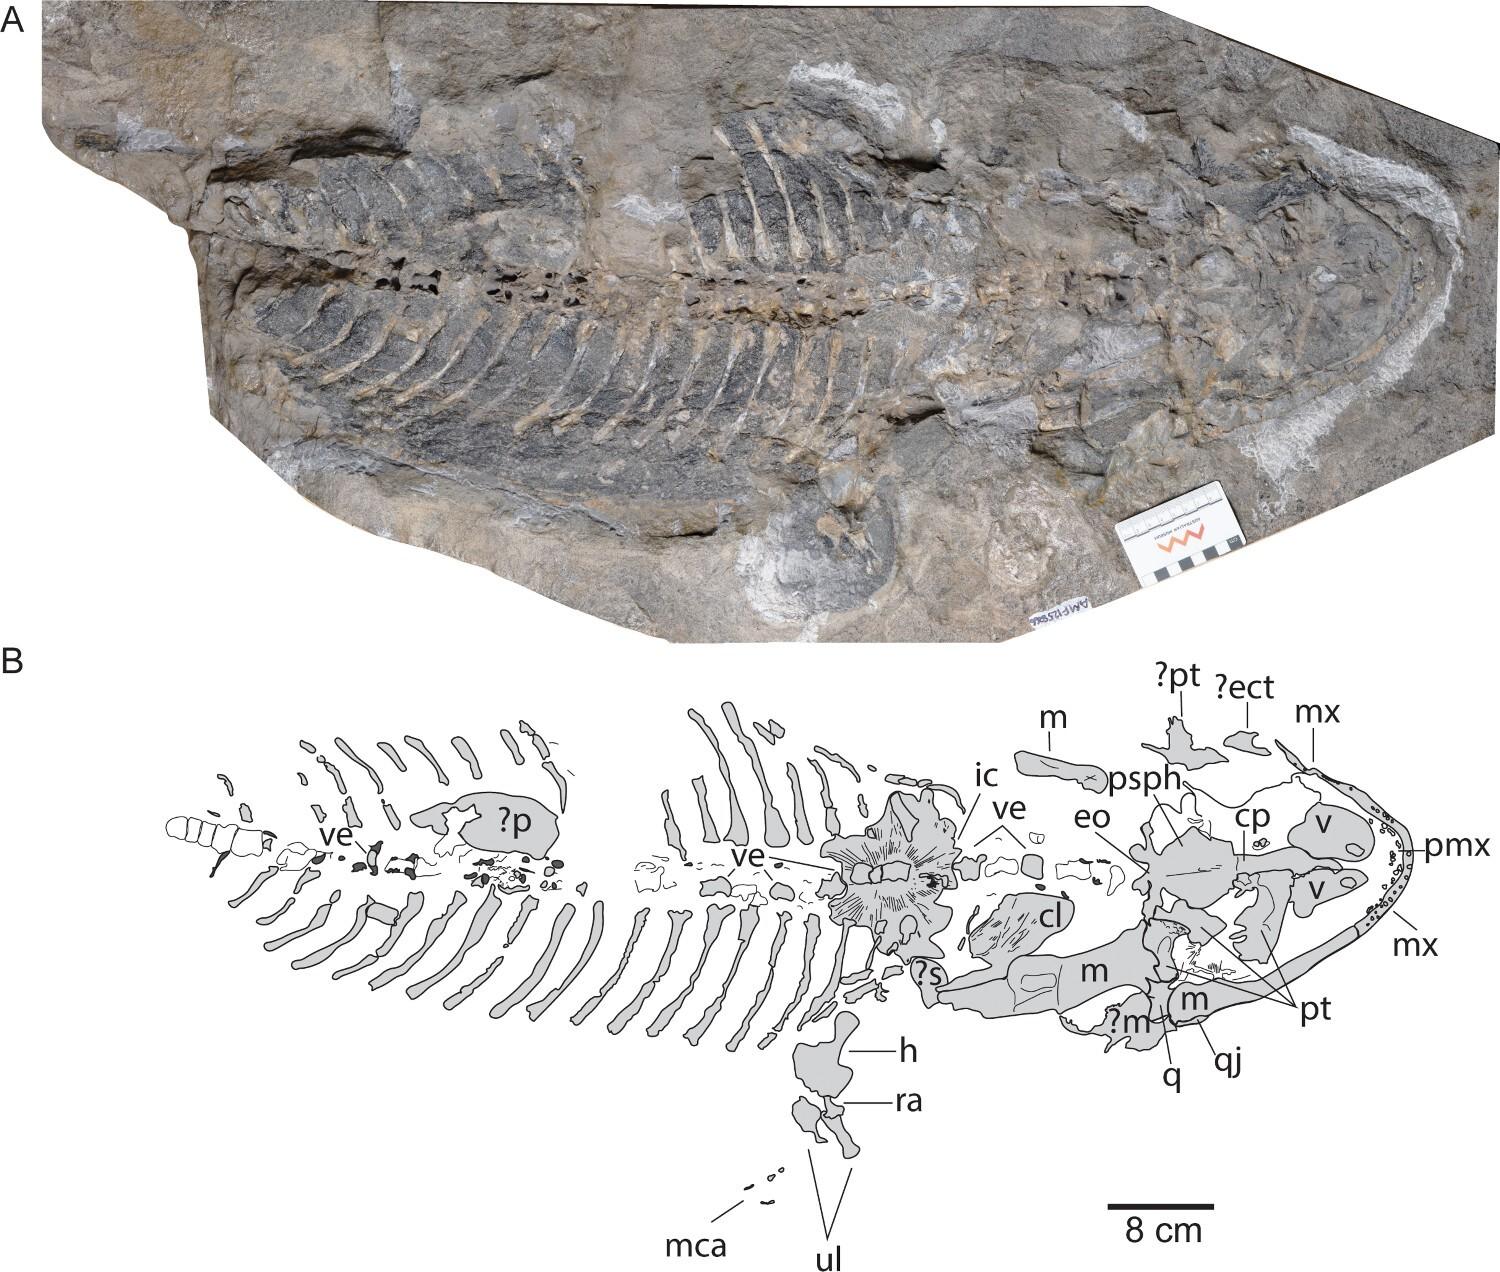 Arenaerpeton supinatus, AM F125866, articulated skeleton. A, full fossil in ventral view; B, schematic interpretation.